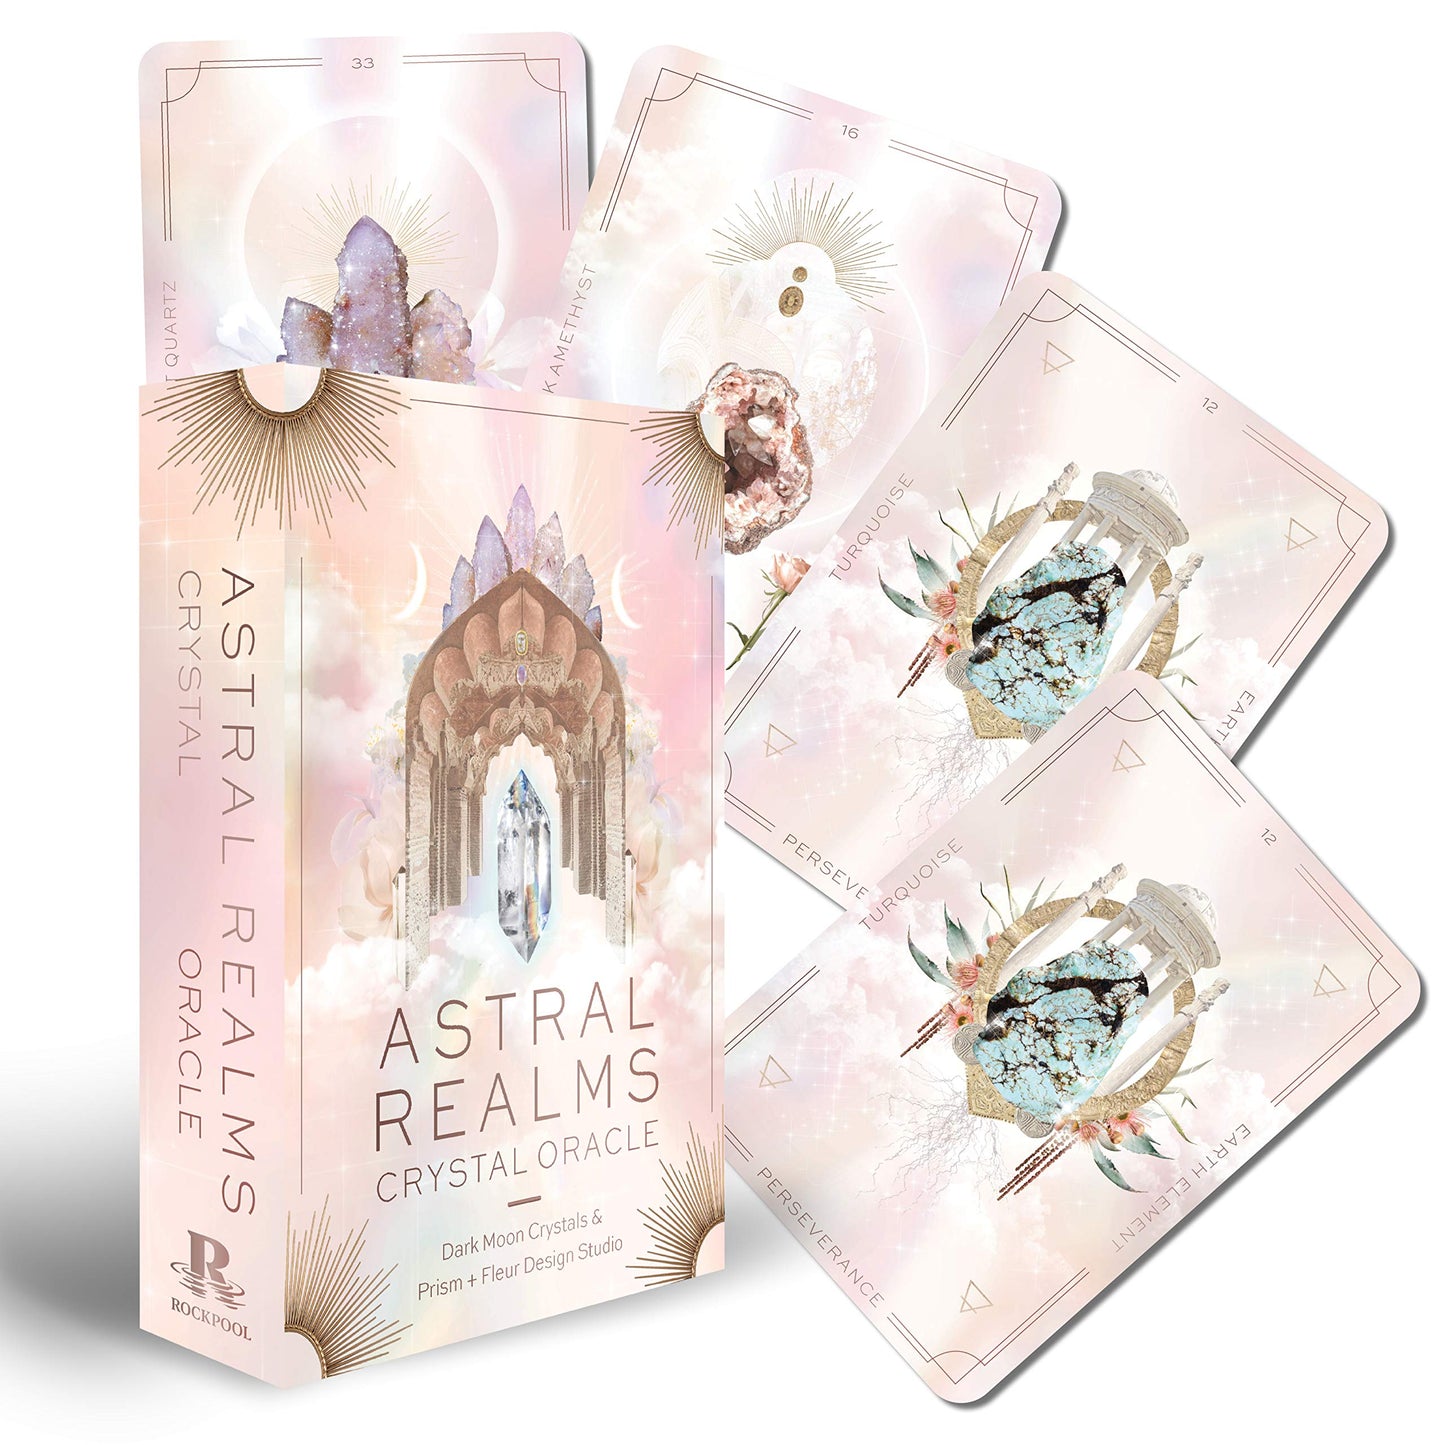 Astral Realms Crystal Oracle || Paige McLeod & Leah Shoman